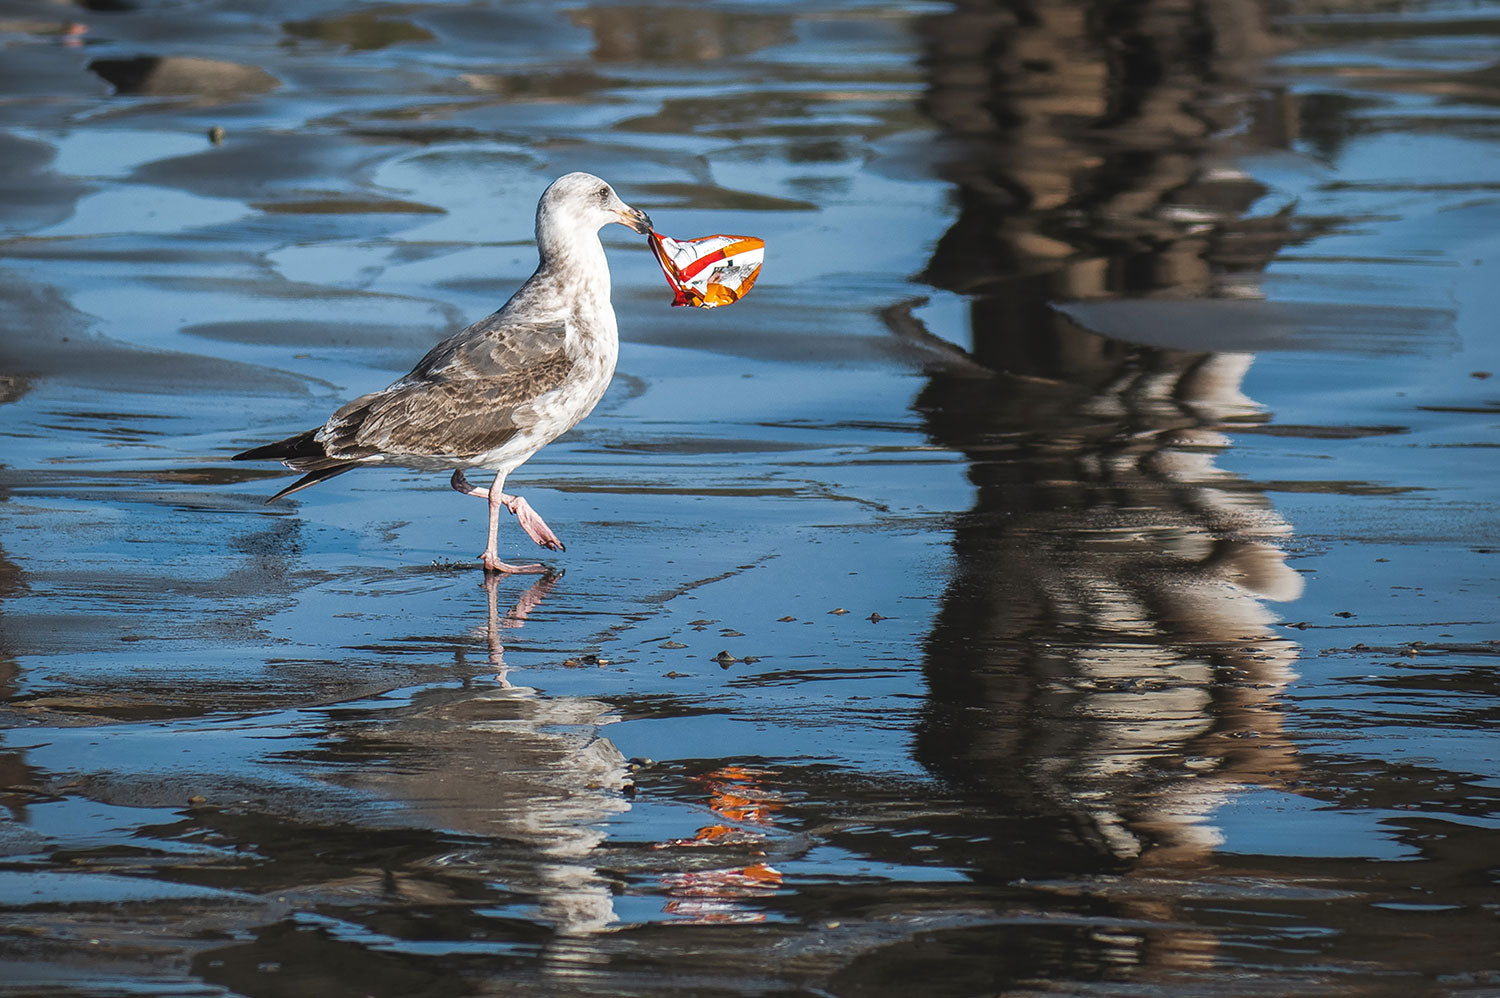 Bird Carrying a Piece of Plastic